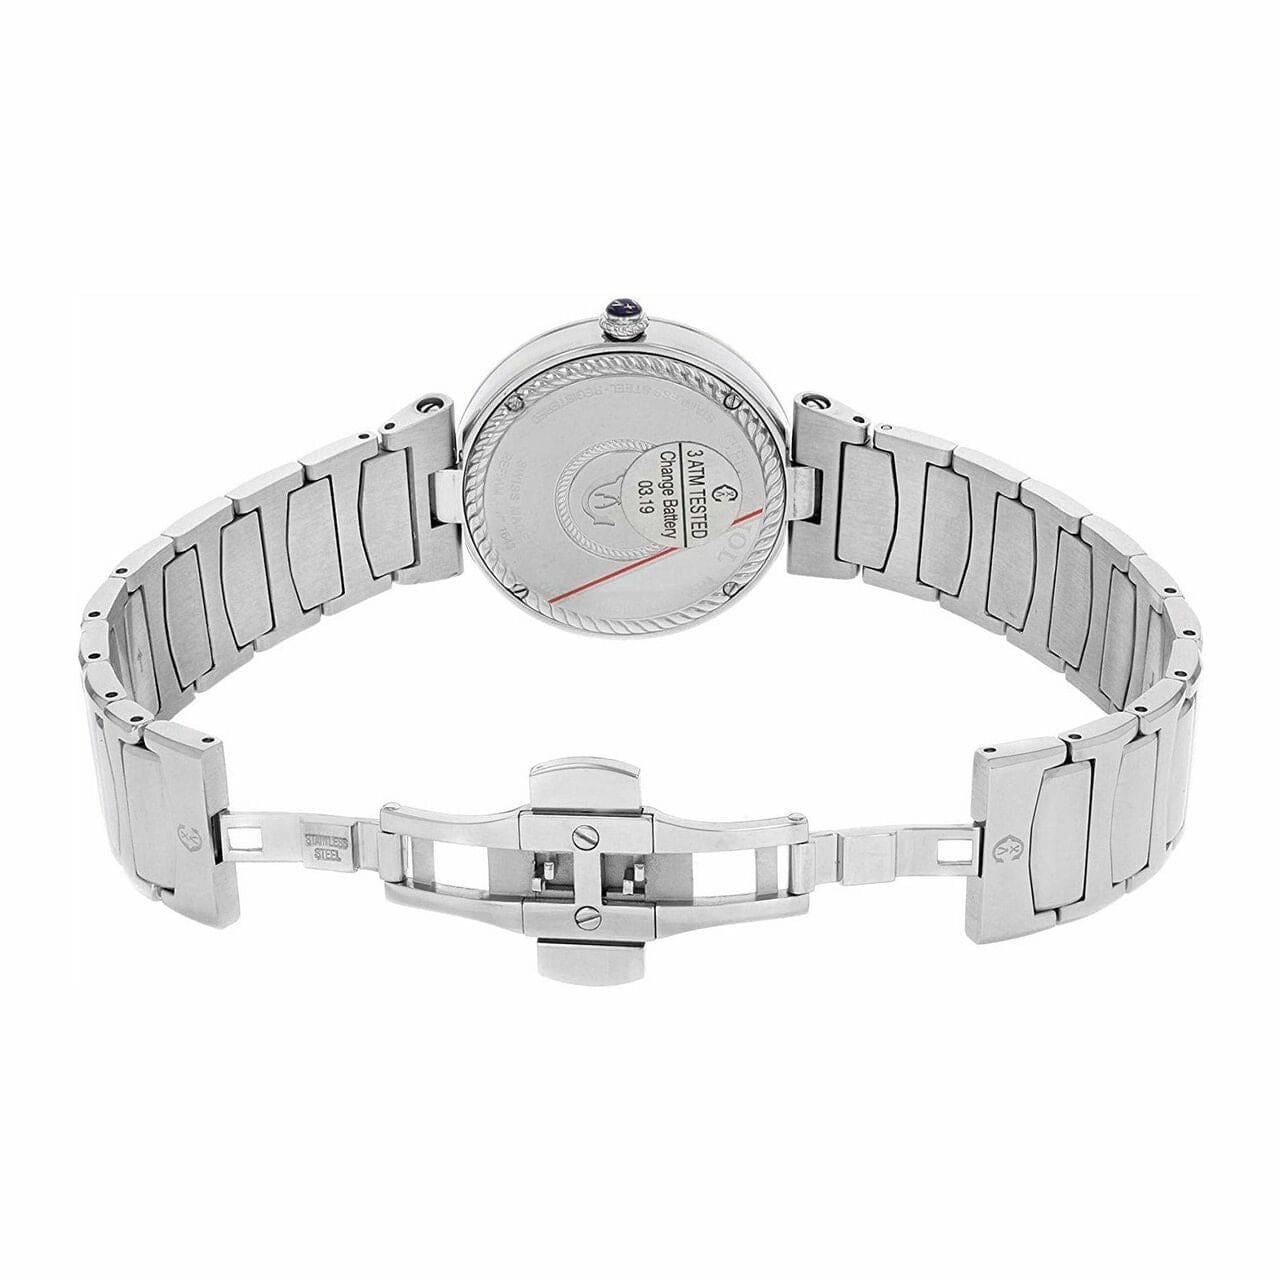 Charriol AMS.920.002 Alexandre C Stainless Steel Mother of Pearl Dial Women's Watch 7630029608739